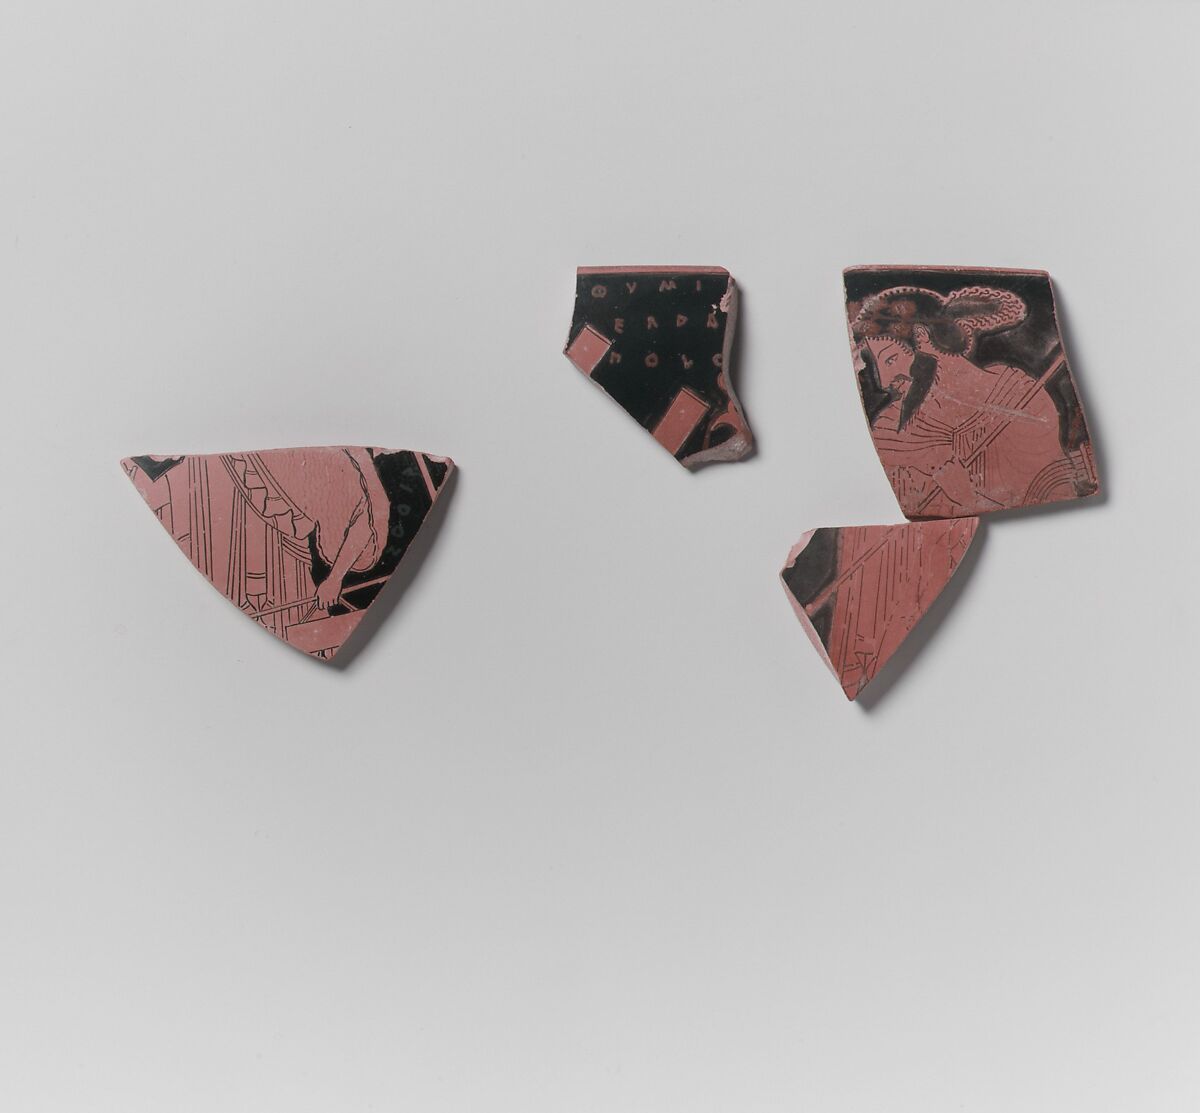 Fragment of a terracotta kylix (drinking cup), Euthymides, Potter, Terracotta, Greek, Attic